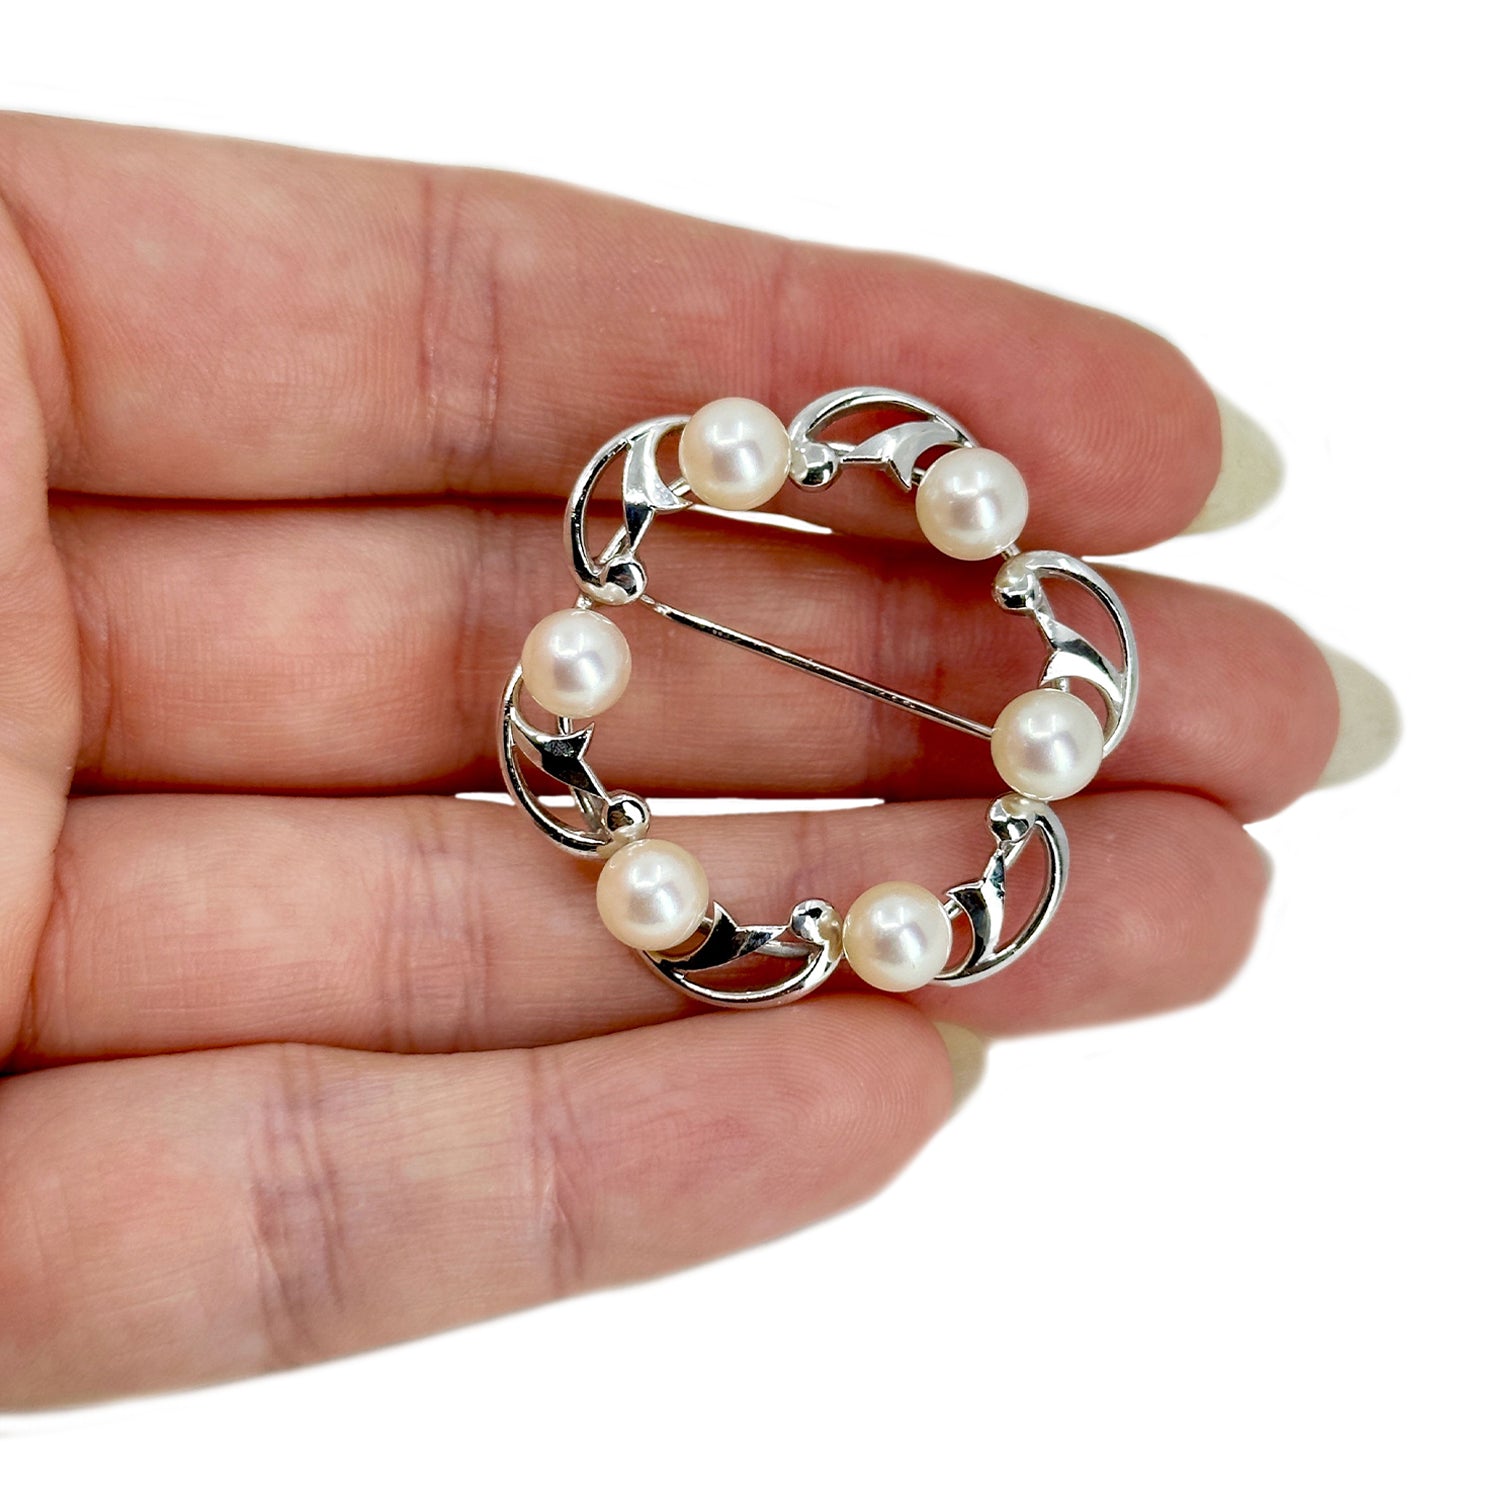 Vintage Mikimoto Leafy Circle Japanese Cultured Saltwater Akoya Pearl Brooch- Sterling Silver